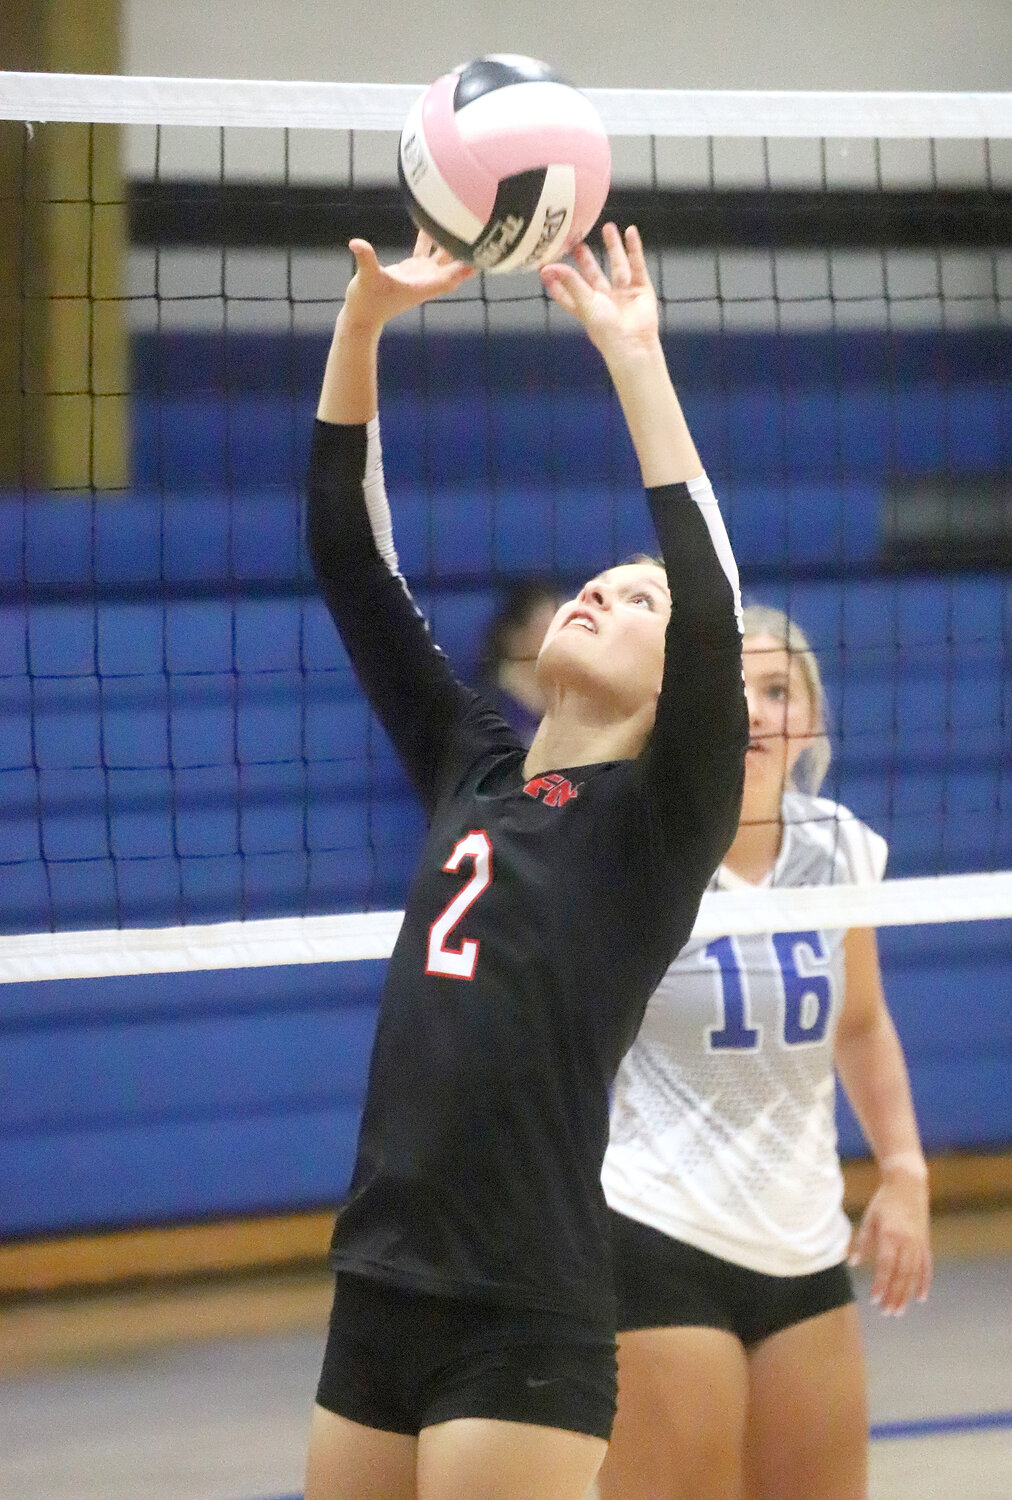 Fort Madison's Mara Smith puts up an assist in the second set of the Bloodhounds' match with HTC Monday night.